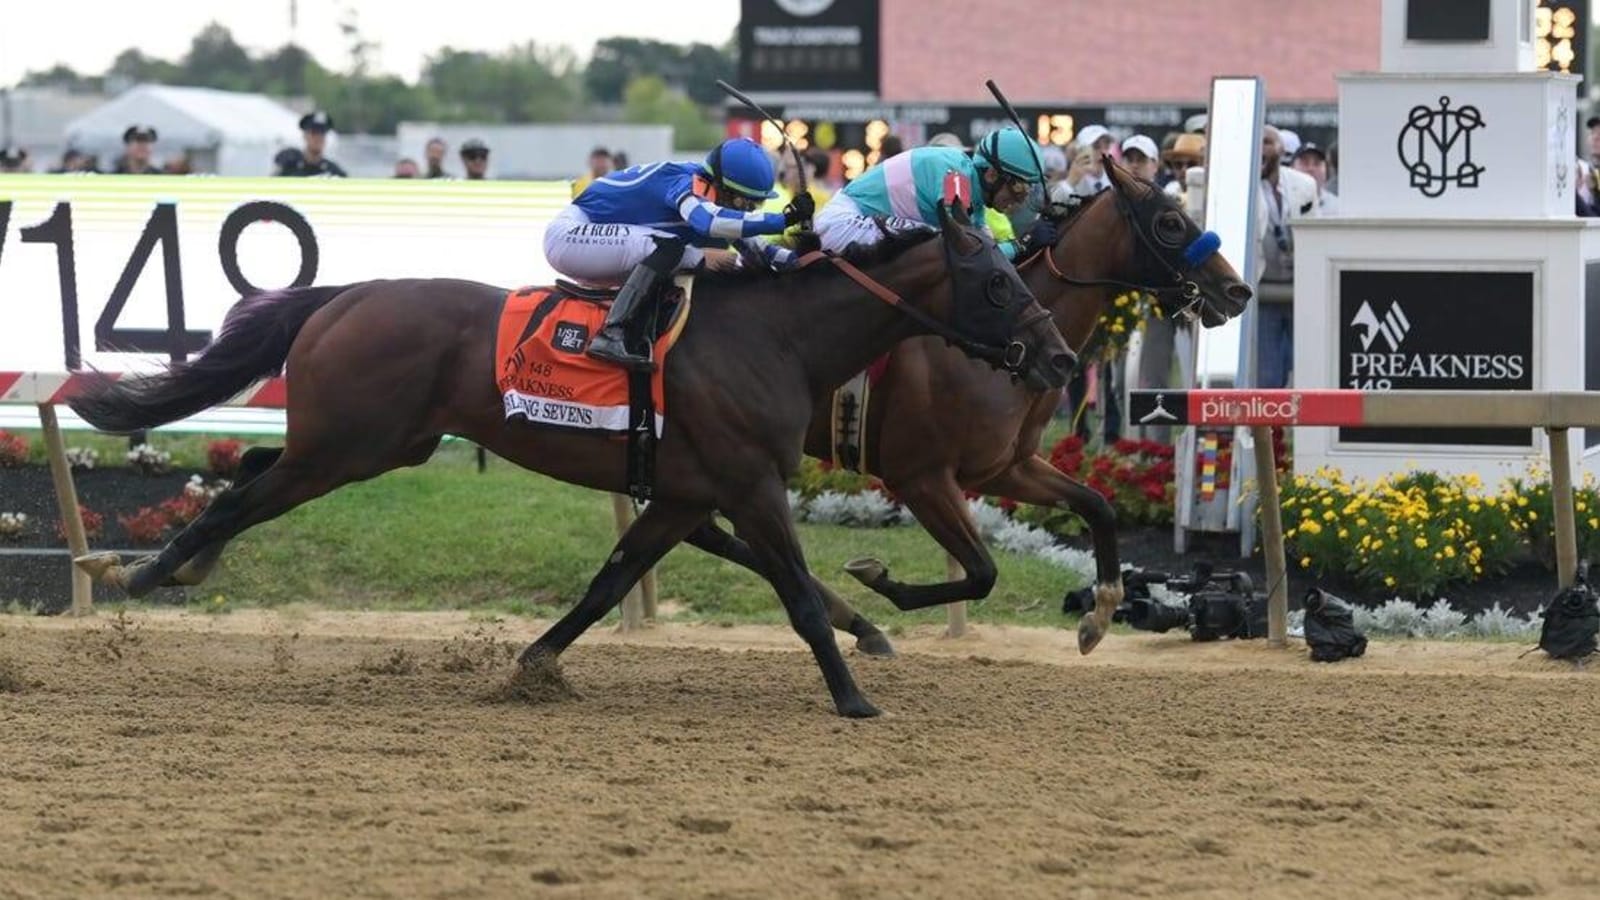 National Treasure notches close win in Preakness Stakes